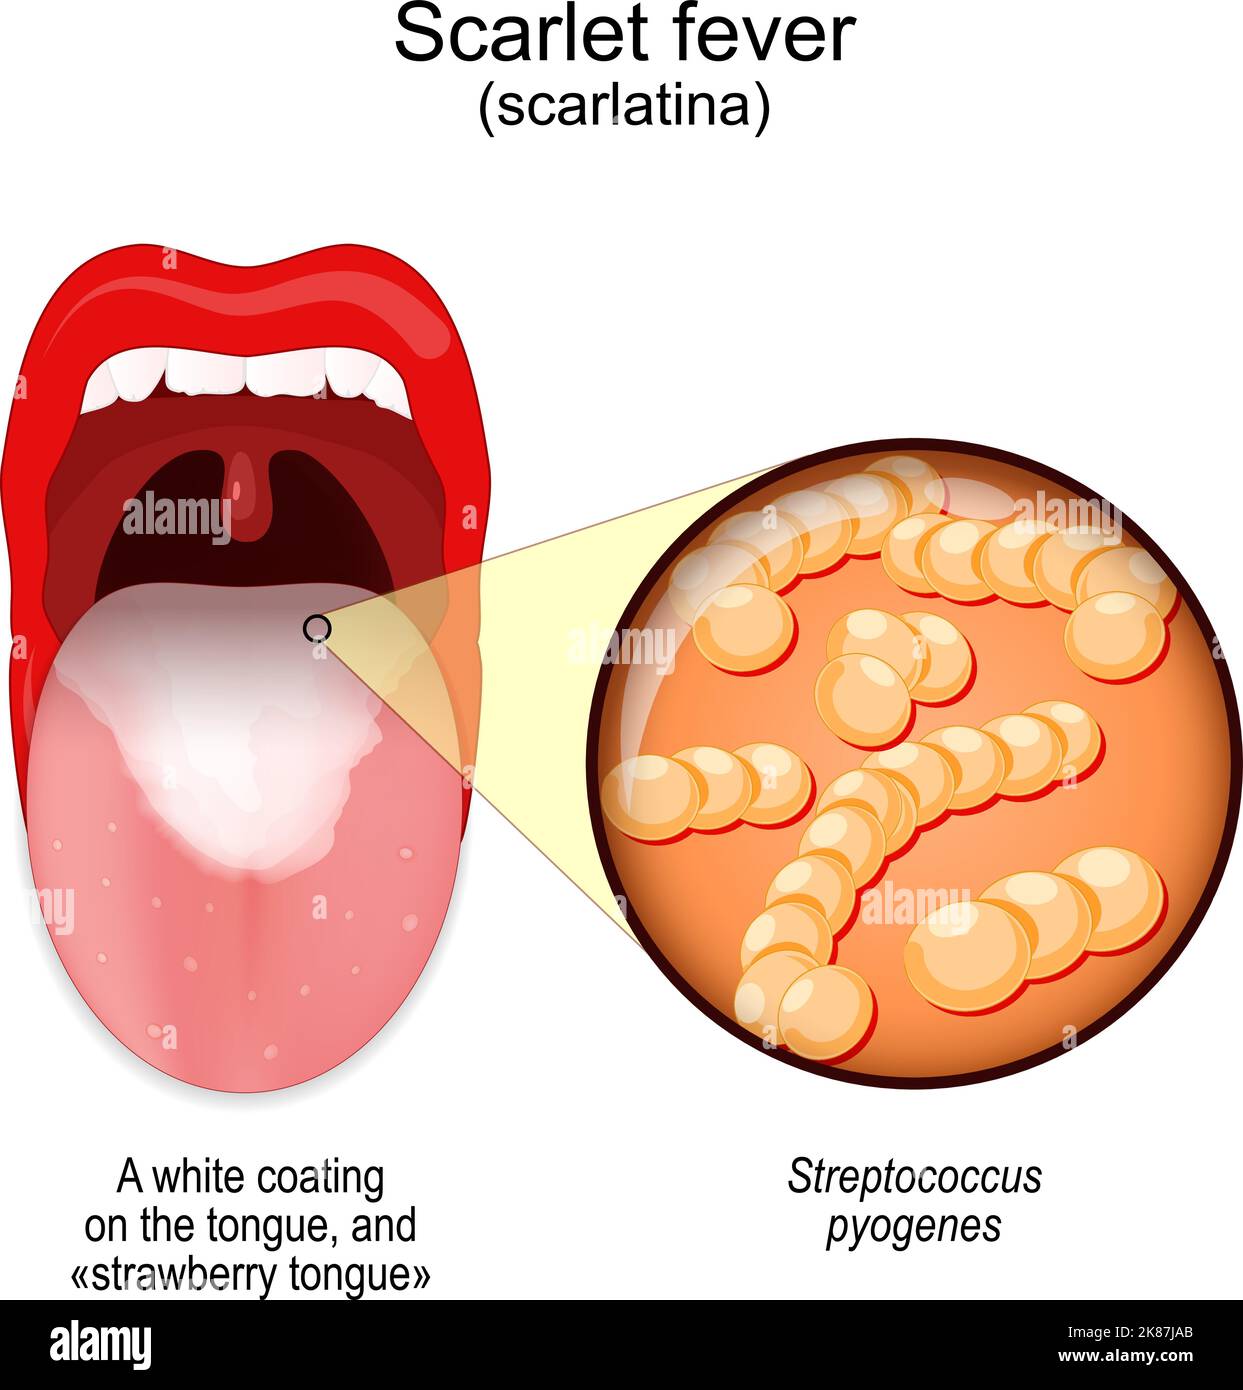 Scarlet fever. symptoms of scarlatina. Mouth with white coating on the tongue, and «strawberry tongue». Close-up of Streptococcus pyogenes. Bacteria Stock Vector